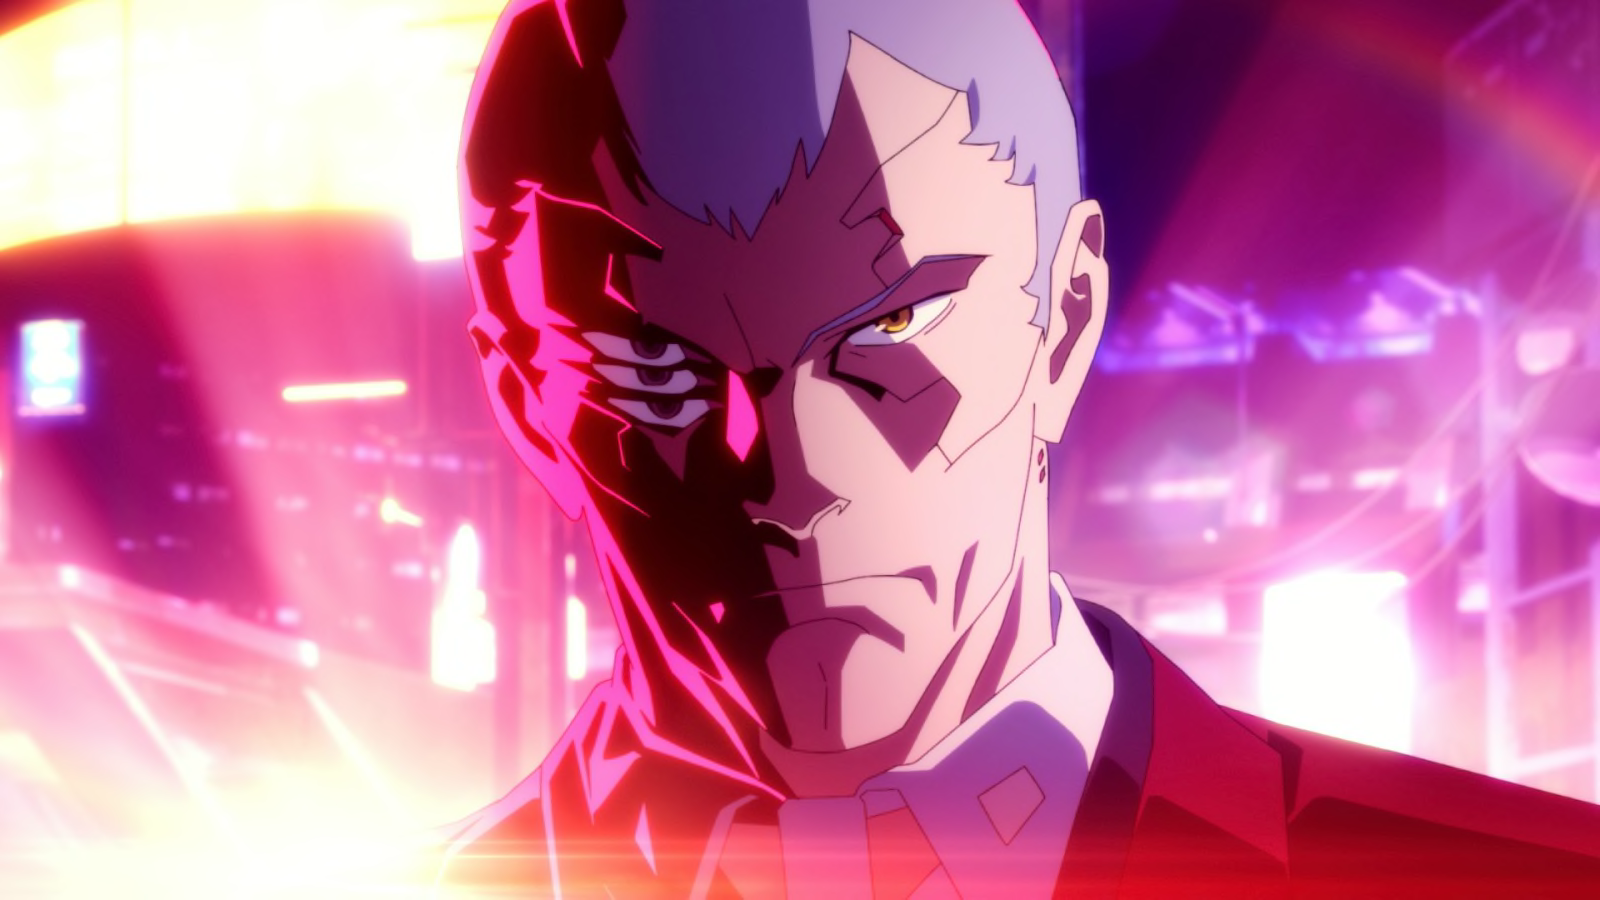 Cyberpunk: Edgerunners Is One of This Year's Strongest Anime